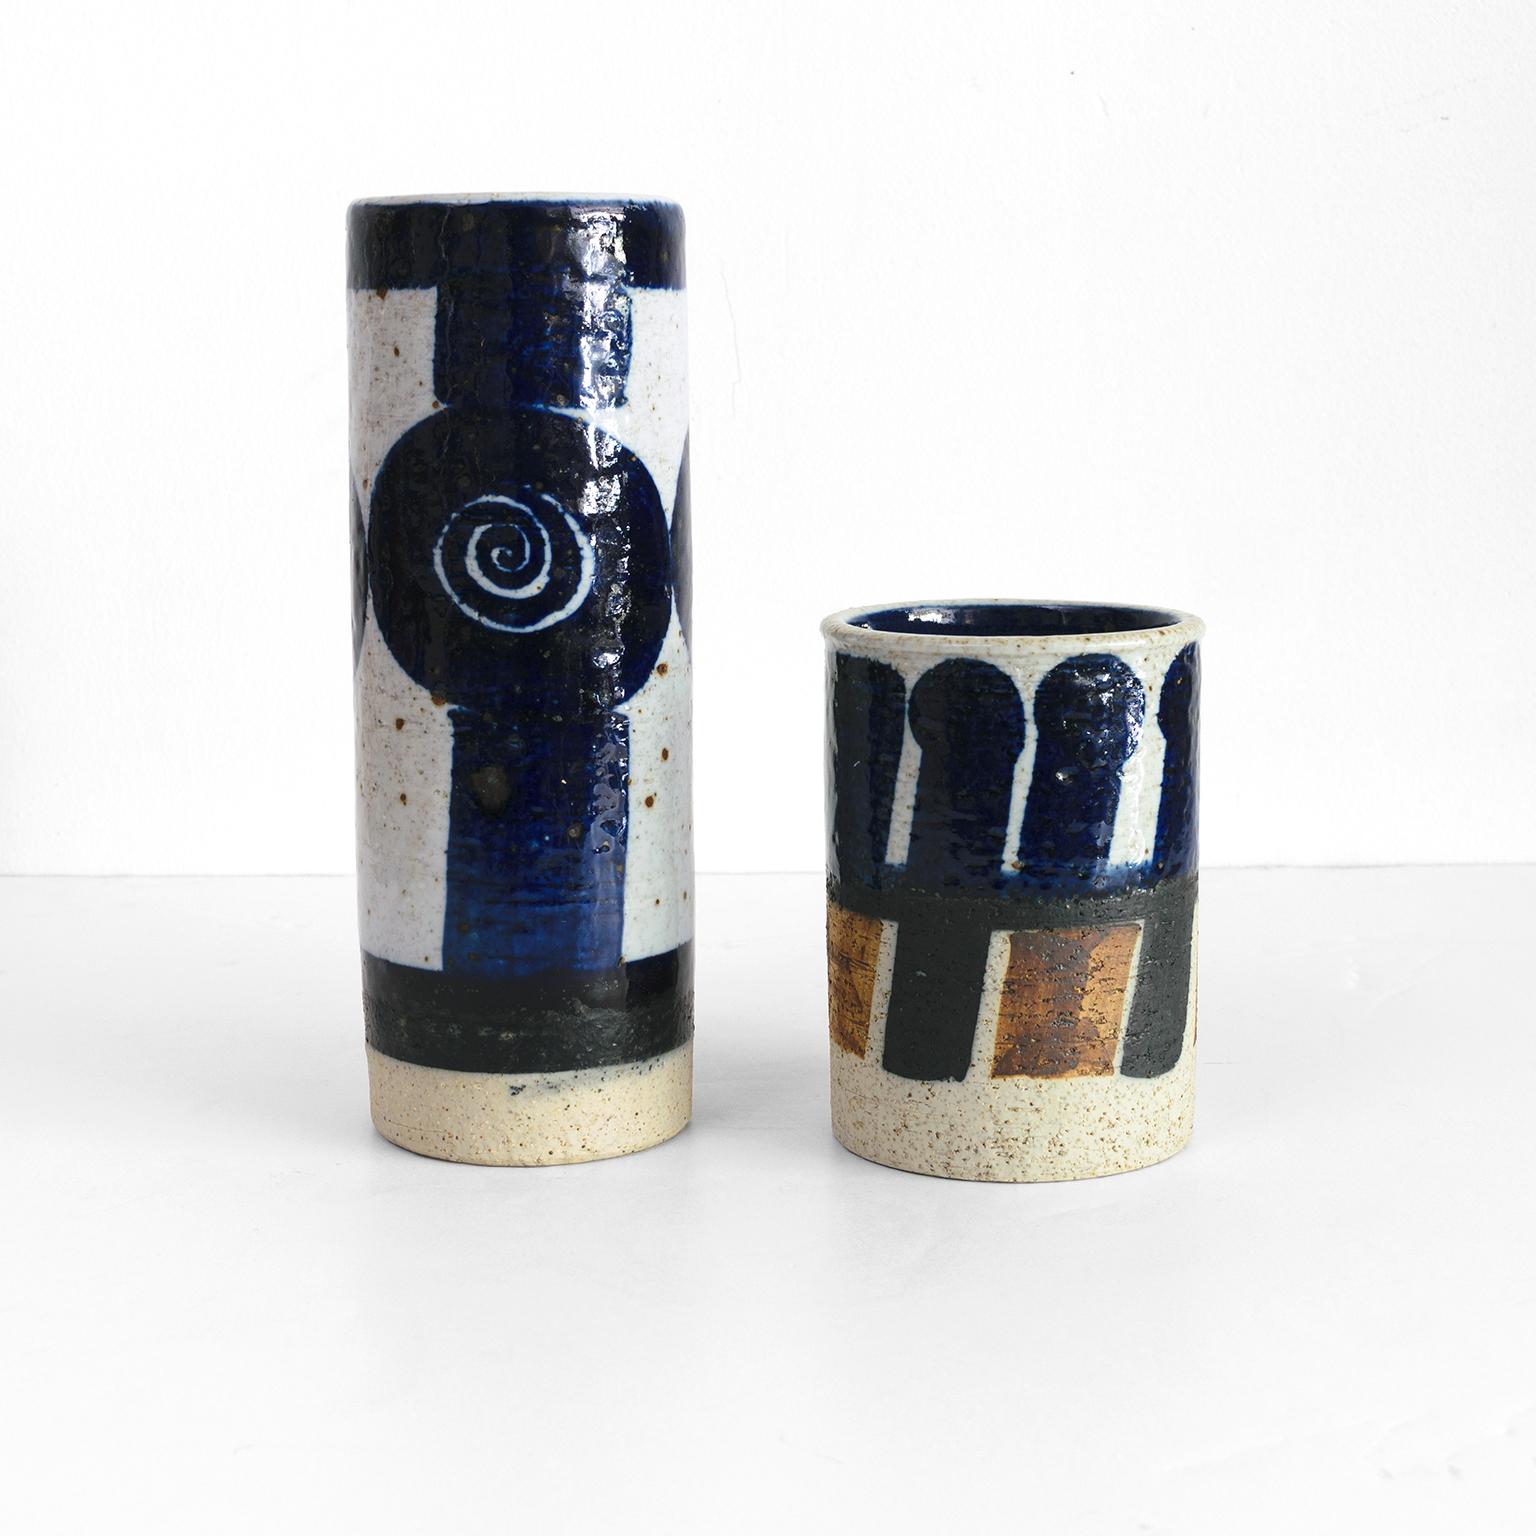 Two Inger Persson studio ceramic vases with hand applied abstract decoration. A signature use of bold blue and black strokes on a white partially glazed stoneware. Make at Rorstrand, Sweden, circa 1960.
Measures: Height: 10.5”. Diameter: 4” &